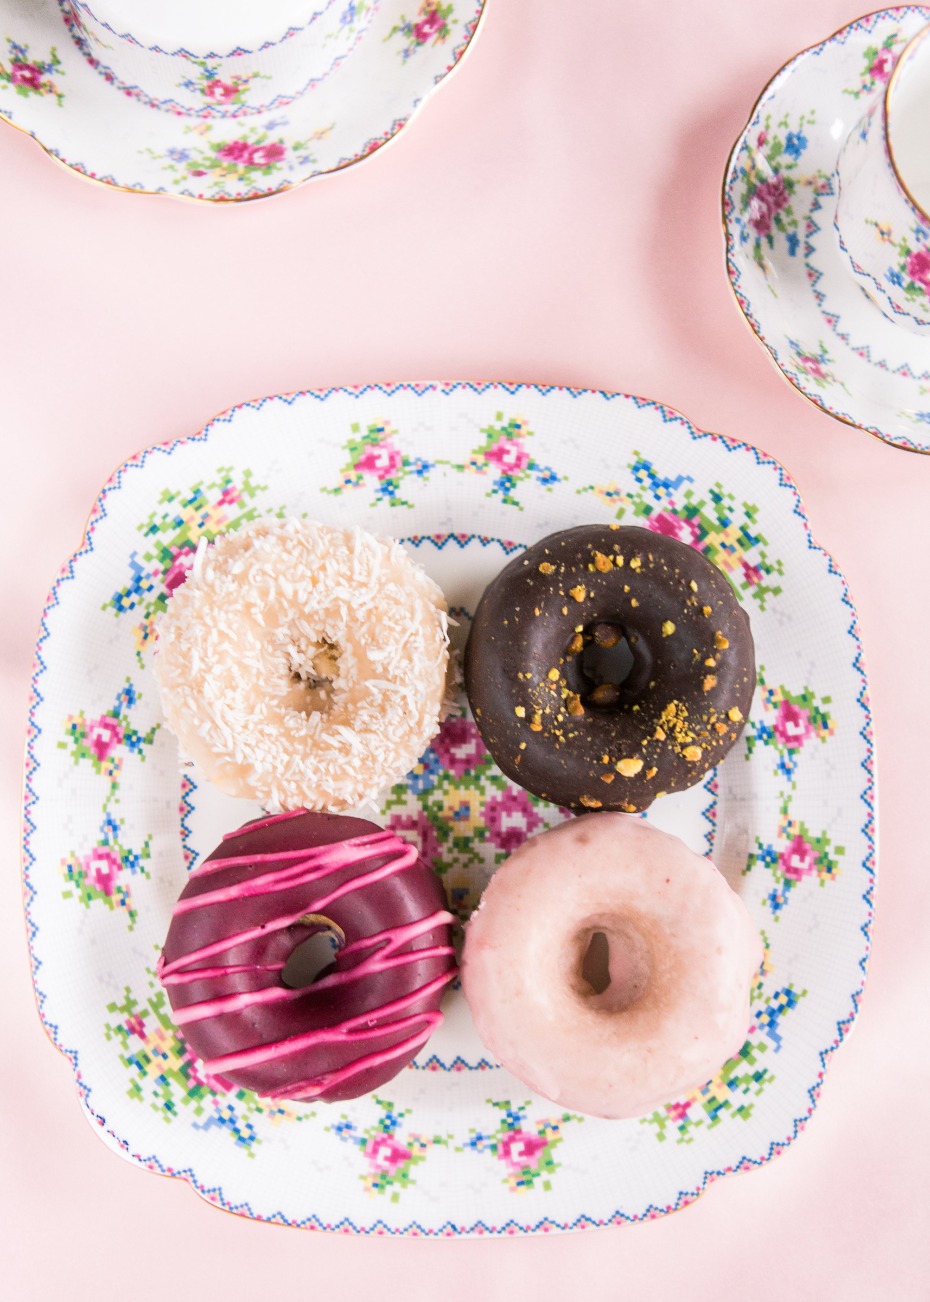 Donuts on a vintage dish